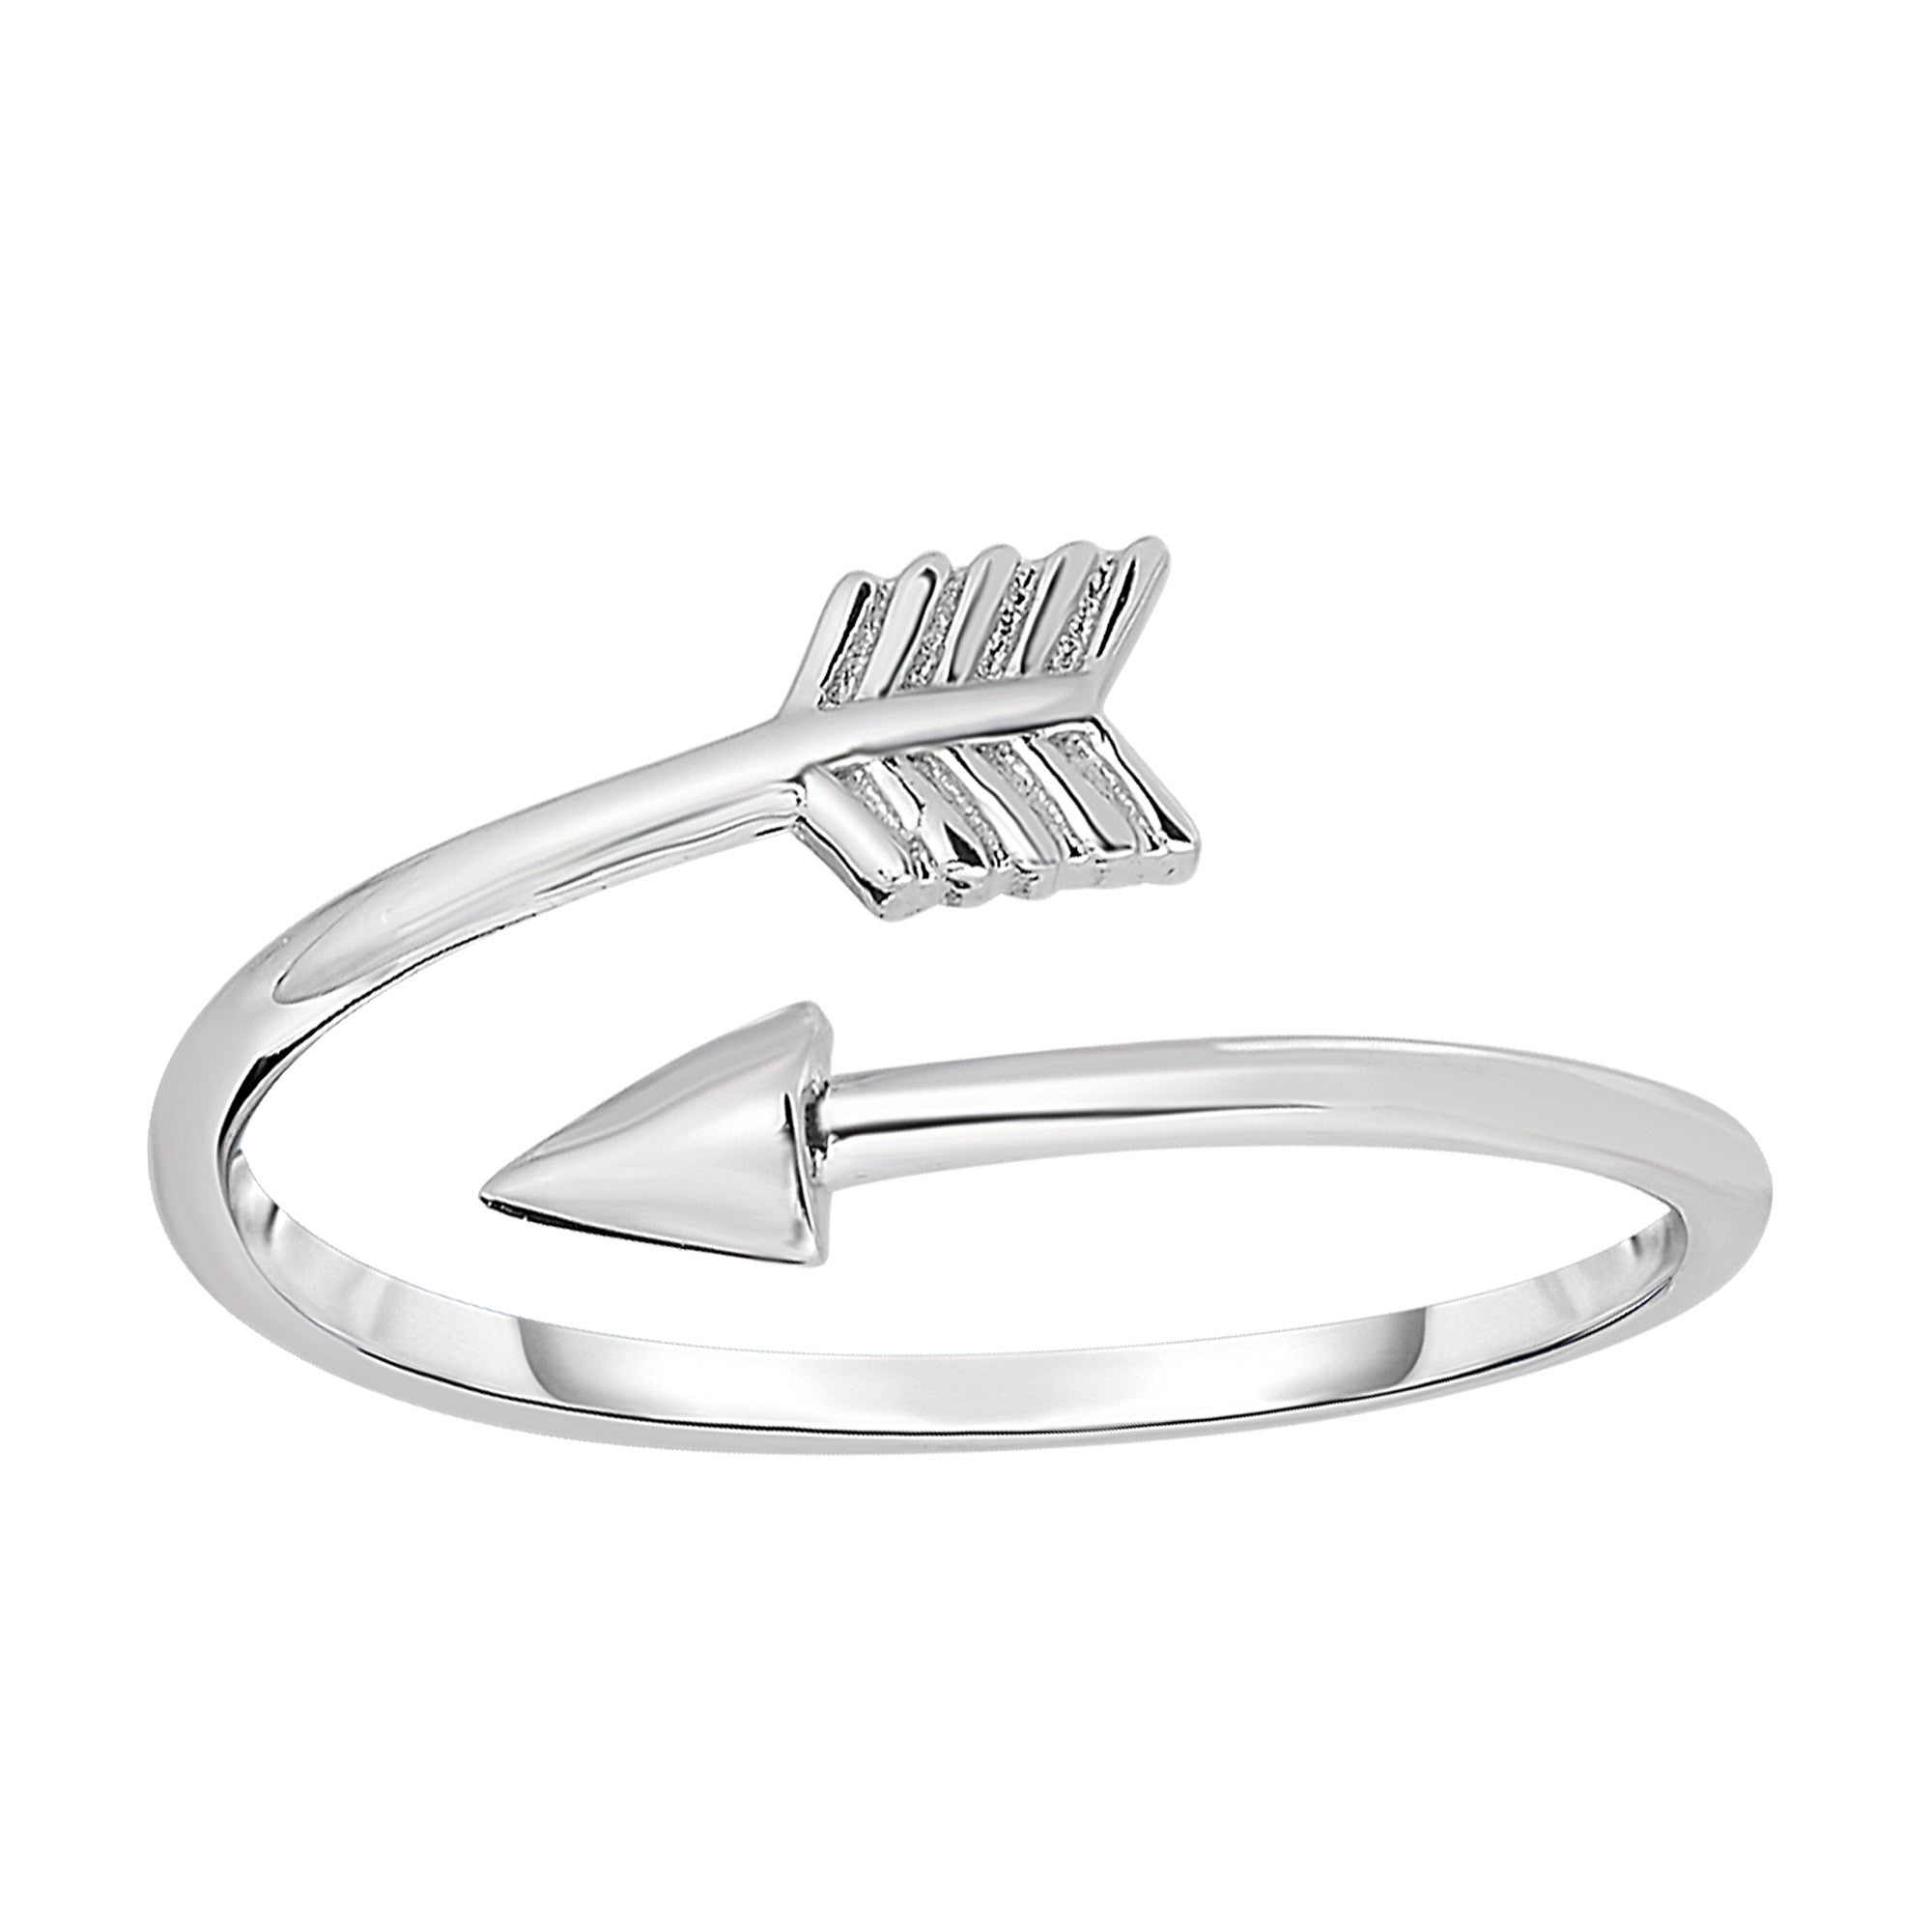 Sterling Silver With Rhodium Finish Open Bypass Arrow Ring fine designer jewelry for men and women